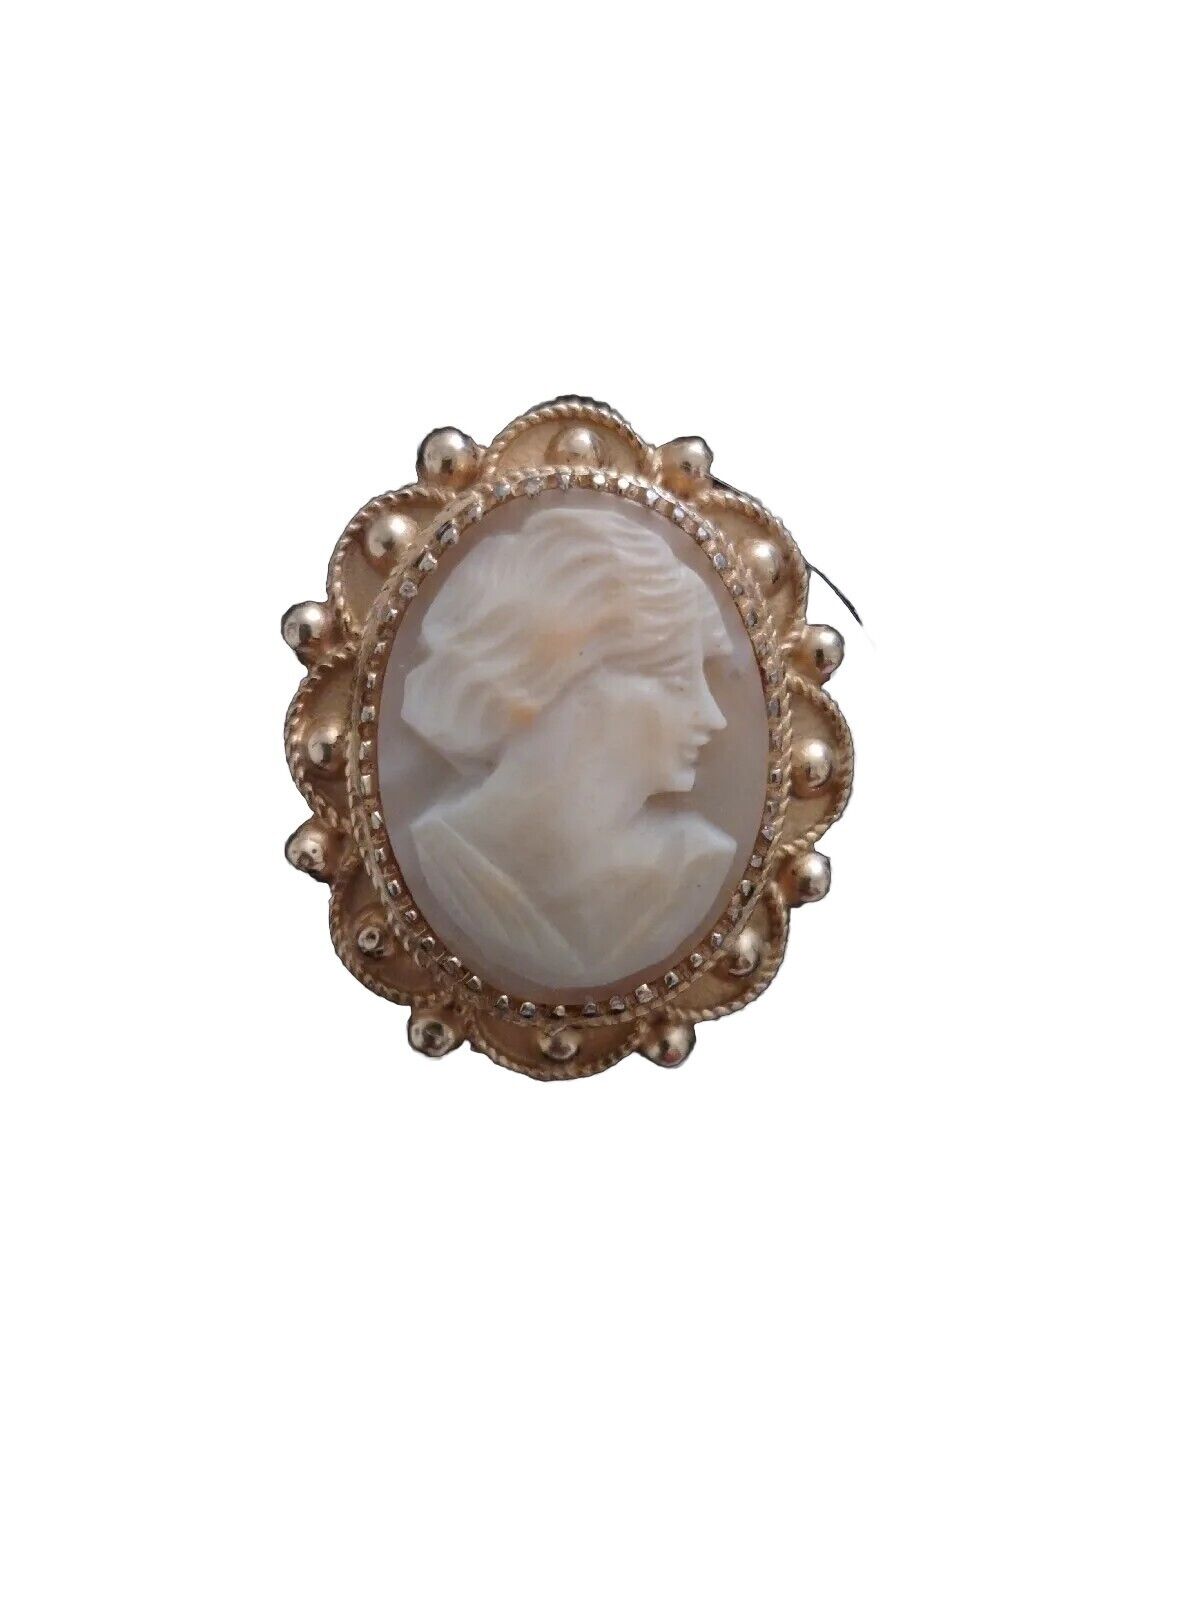 Antique Gold carved Shell Cameo Brooch/Pendant